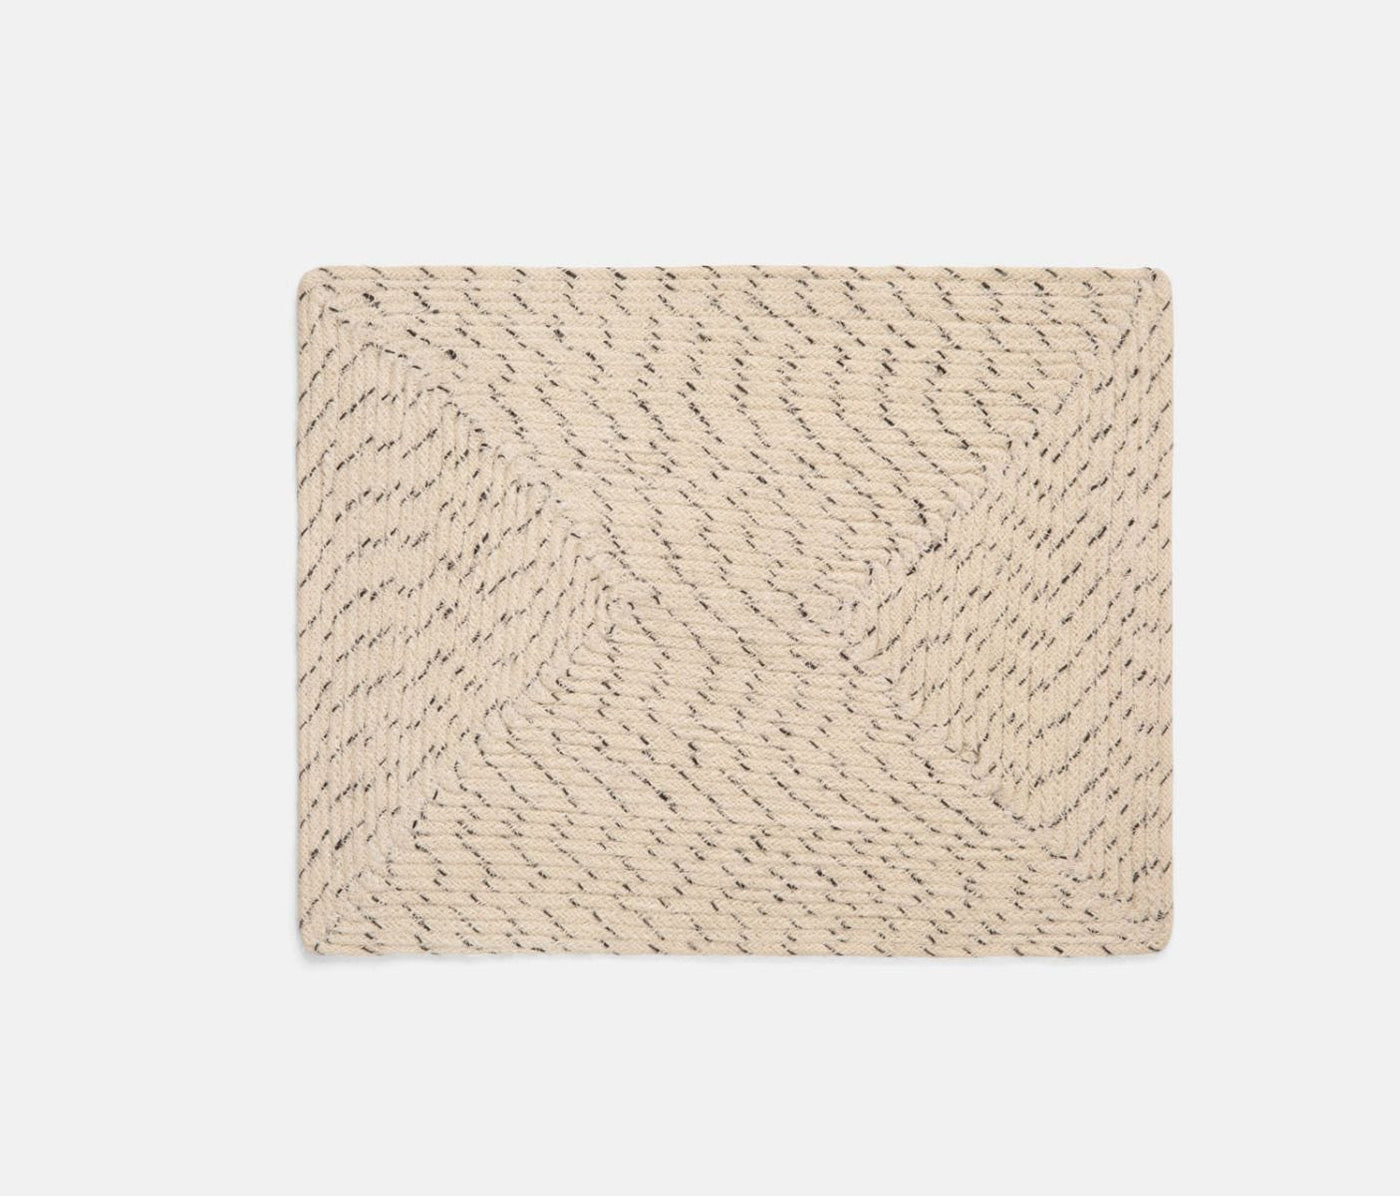 PLACEMAT SPECKLED WHITE JUTE (Available in 2 Sizes)